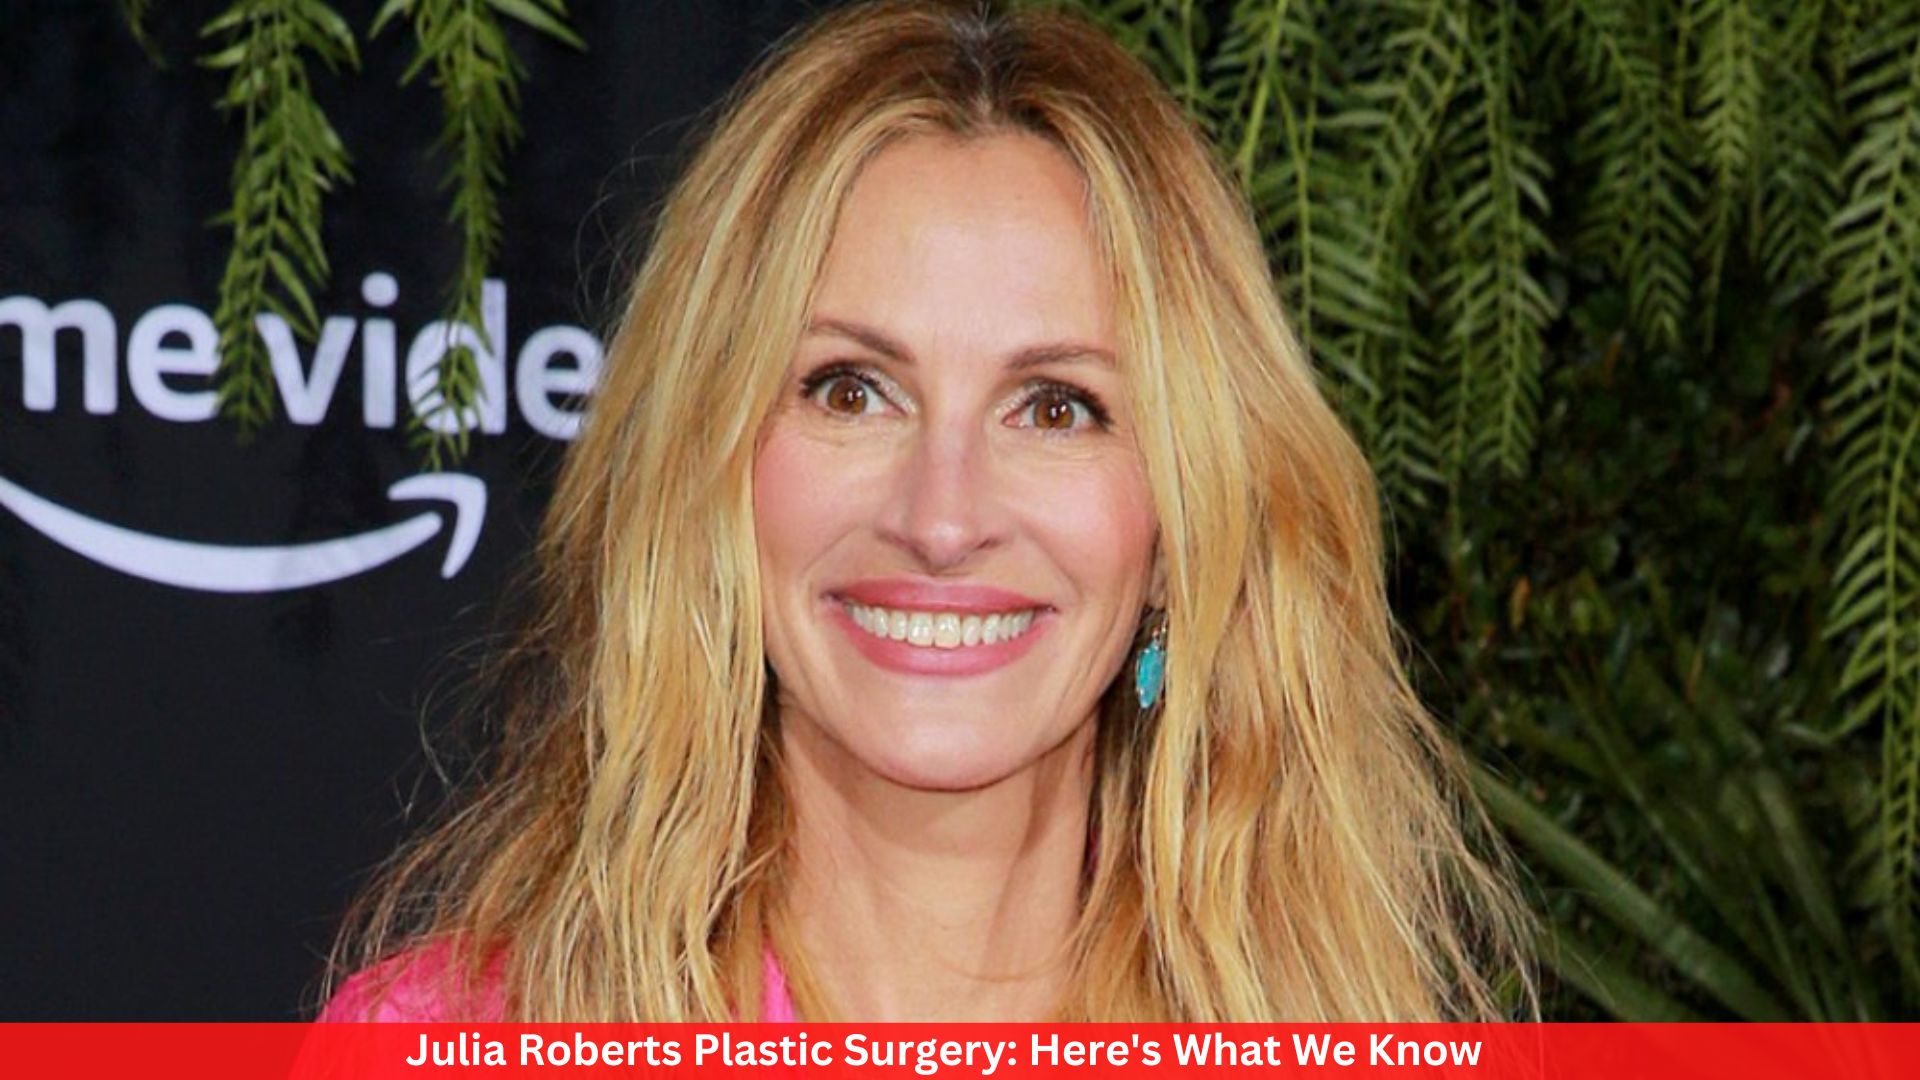 Julia Roberts Plastic Surgery: Here's What We Know